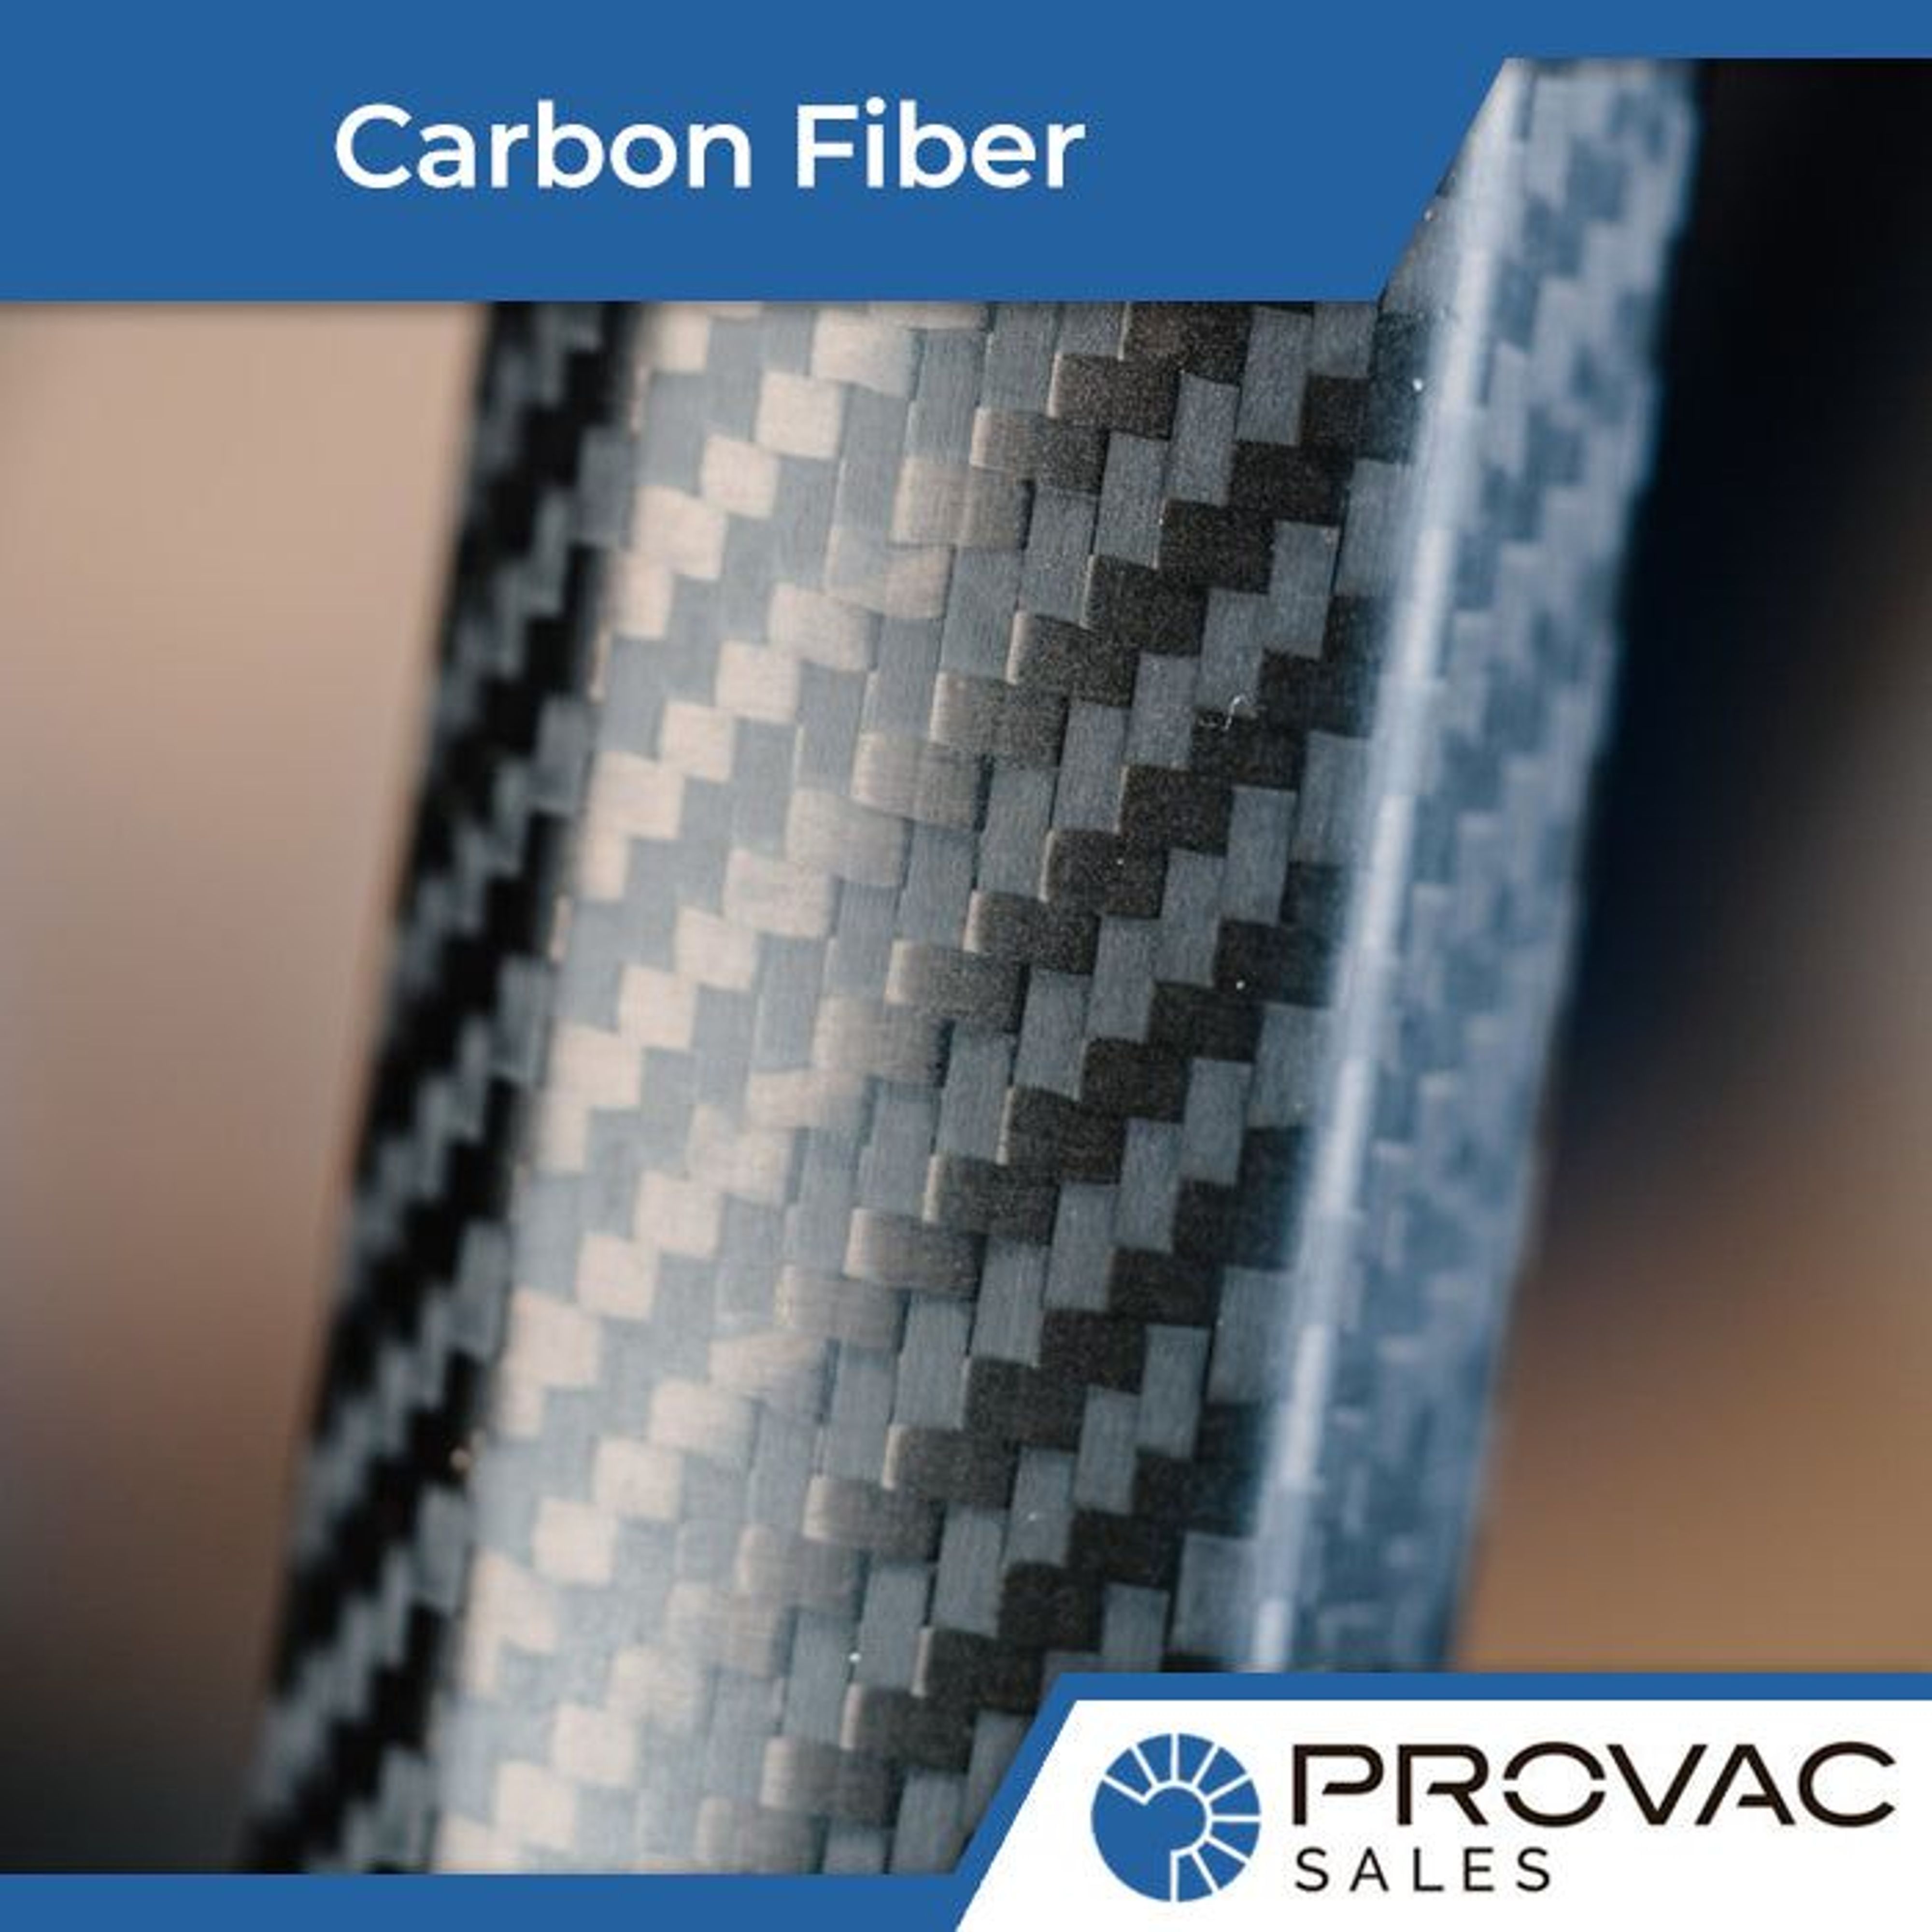 The Role of Vacuum Pumps in Carbon Fiber Production Background